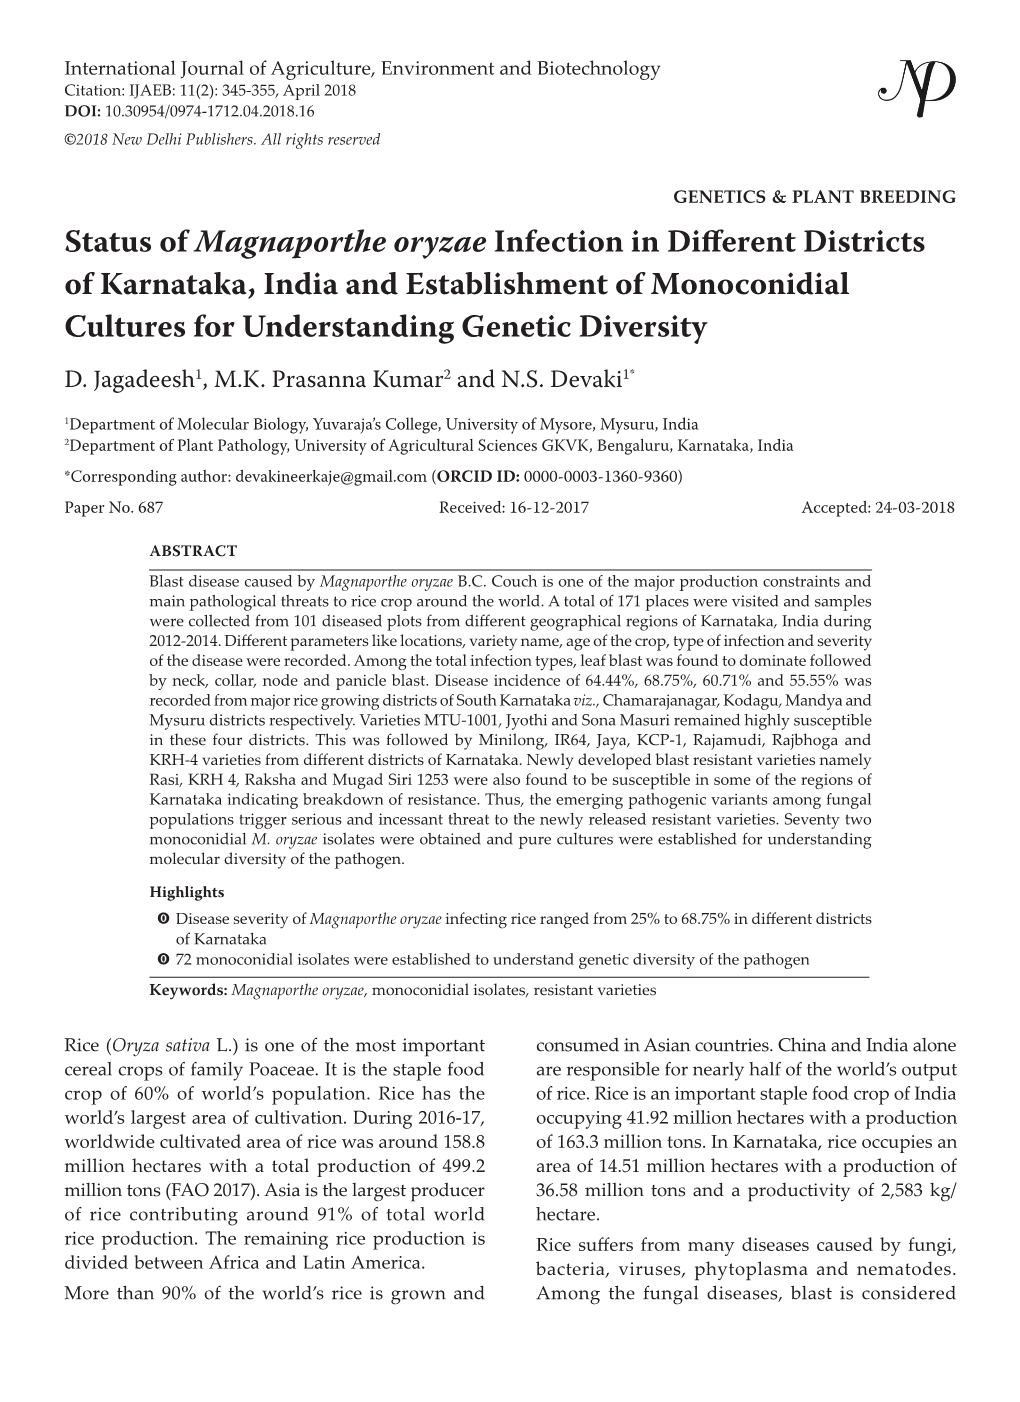 Status of Magnaporthe Oryzae Infection in Different Districts of Karnataka, India and Establishment of Monoconidial Cultures for Understanding Genetic Diversity D